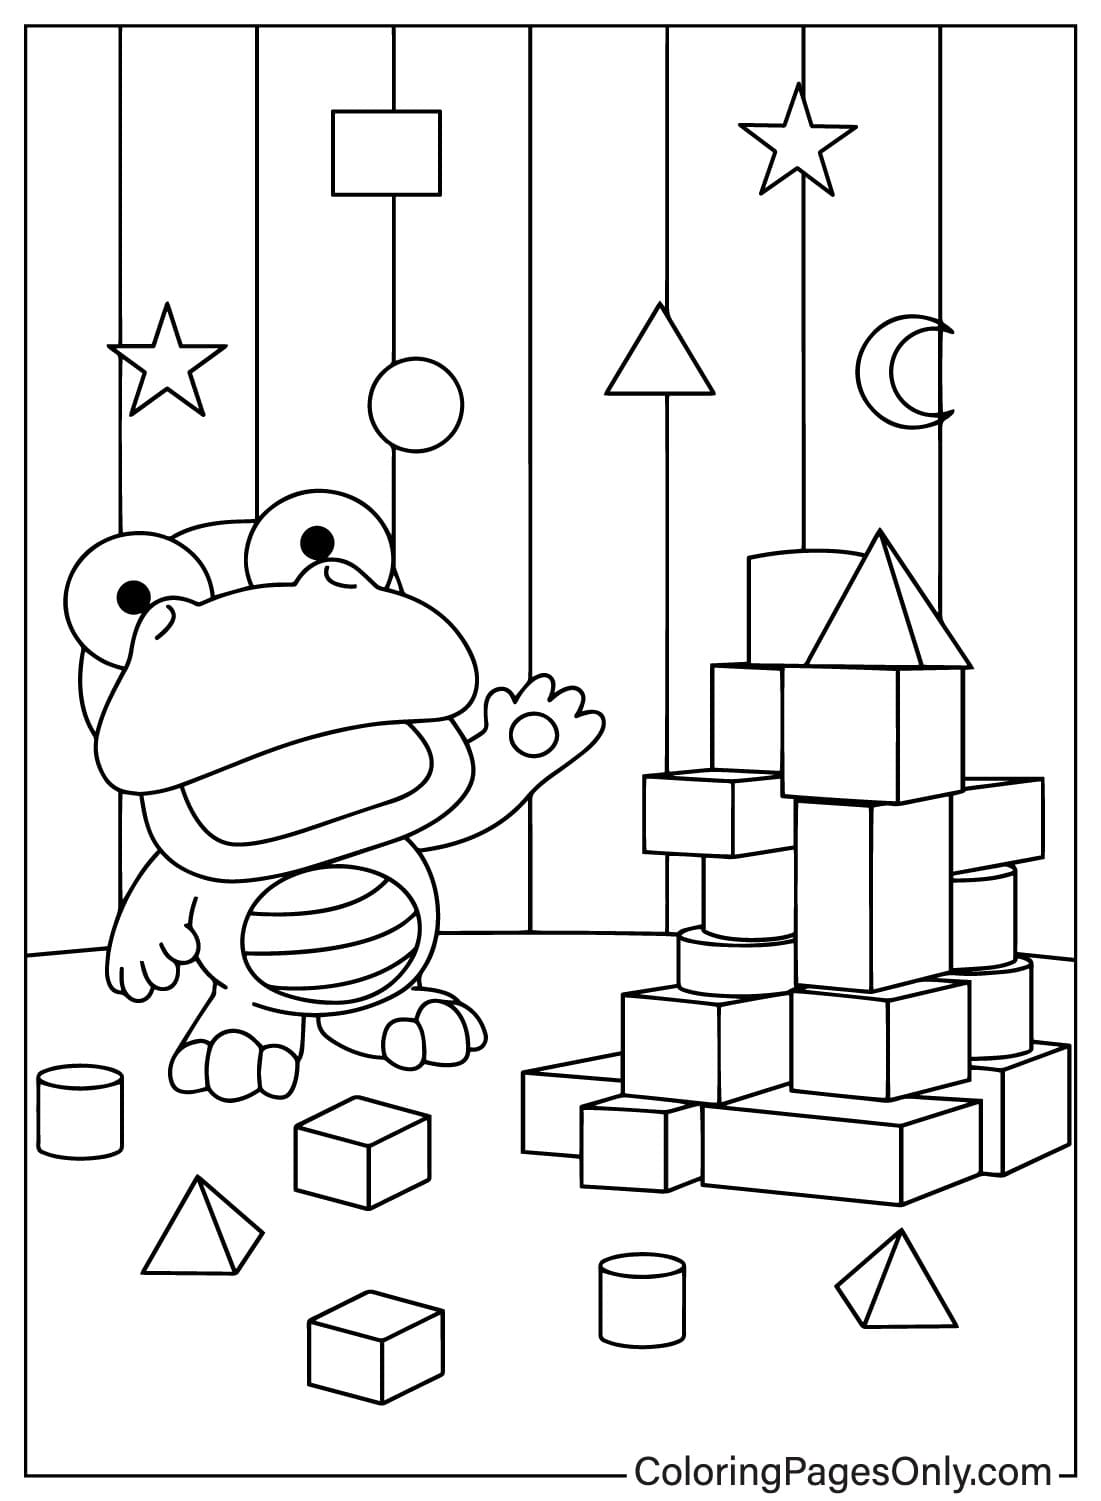 Crong Coloring Page from Pororo the Little Penguin